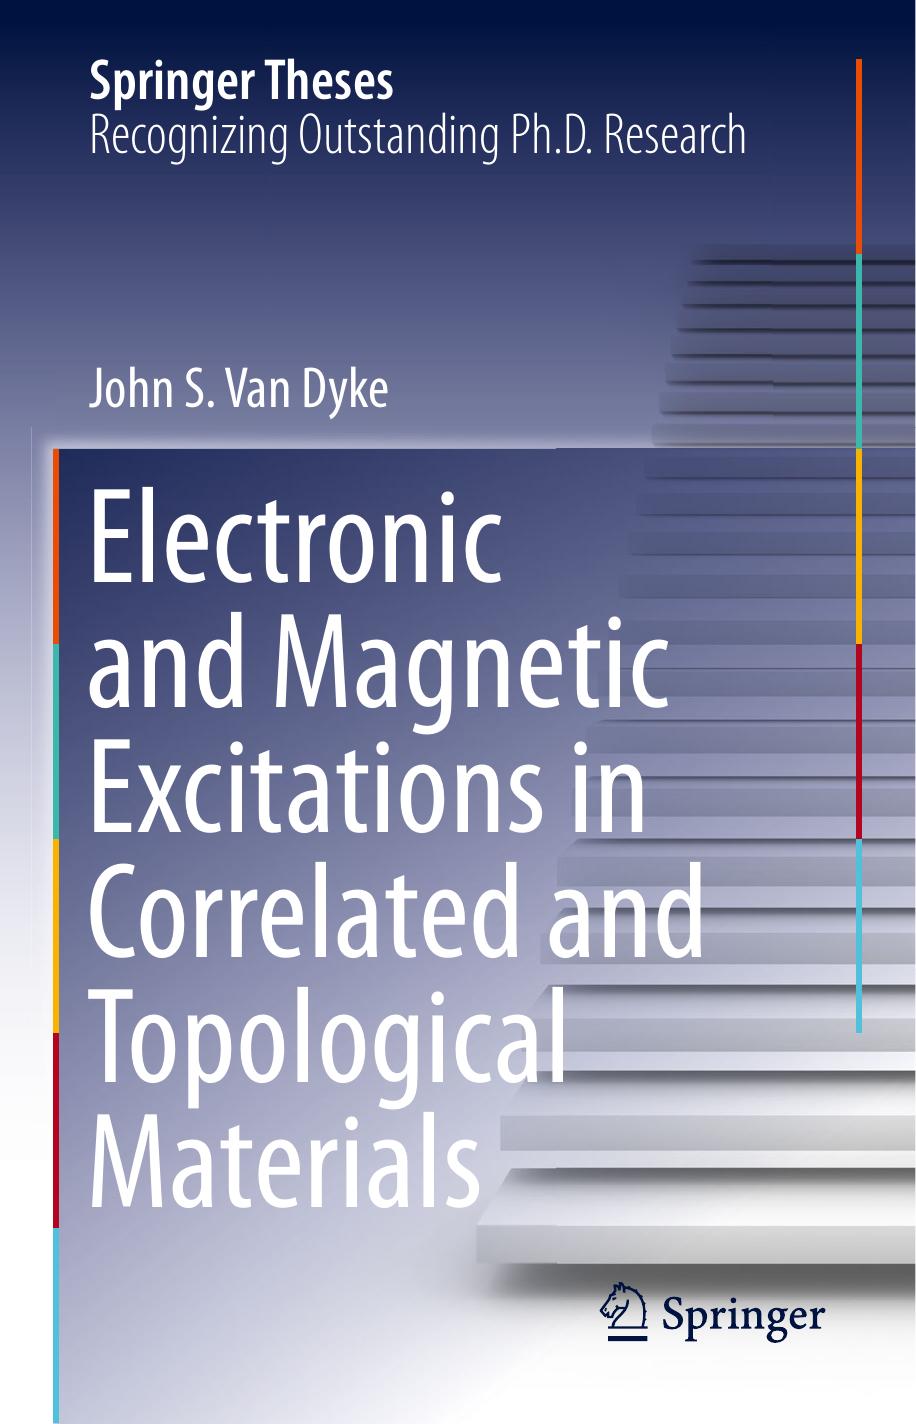 Electronic and Magnetic Excitations in Correlated and Topological Materials by John S. Van Dyke